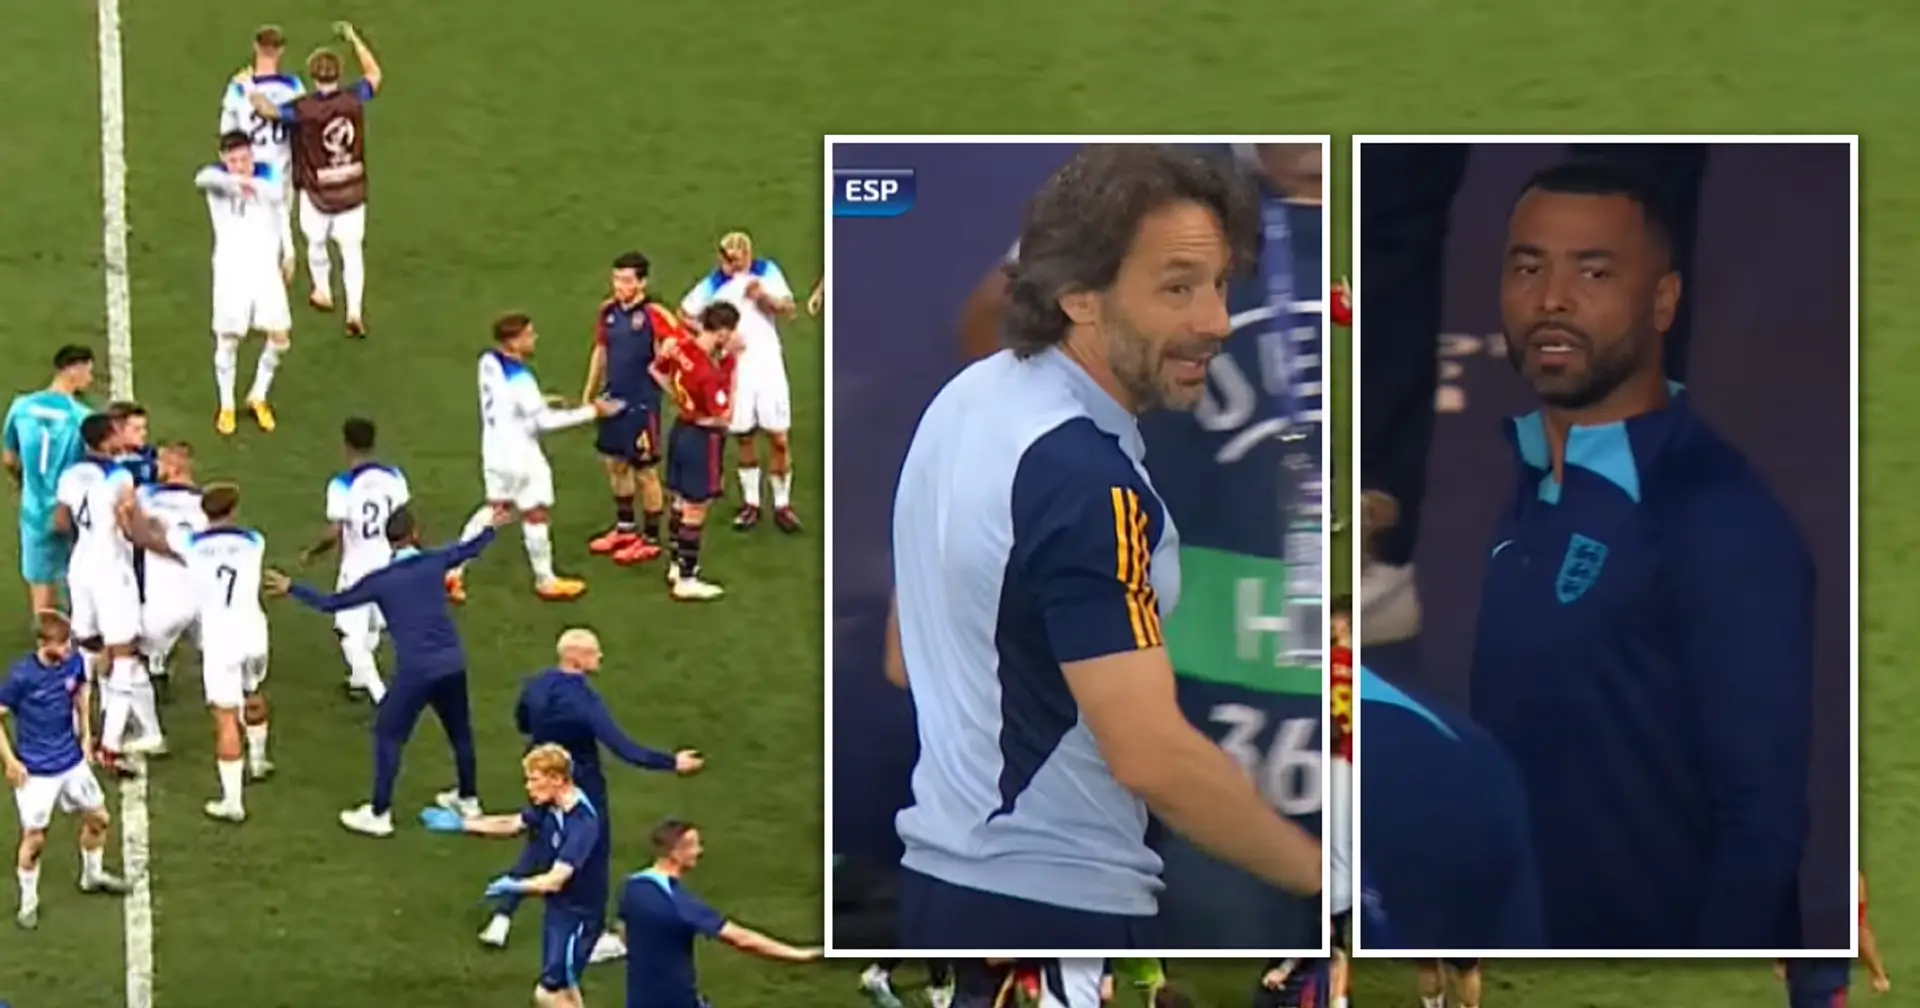 Ashley Cole was shown red card as England goal sparks bench brawl